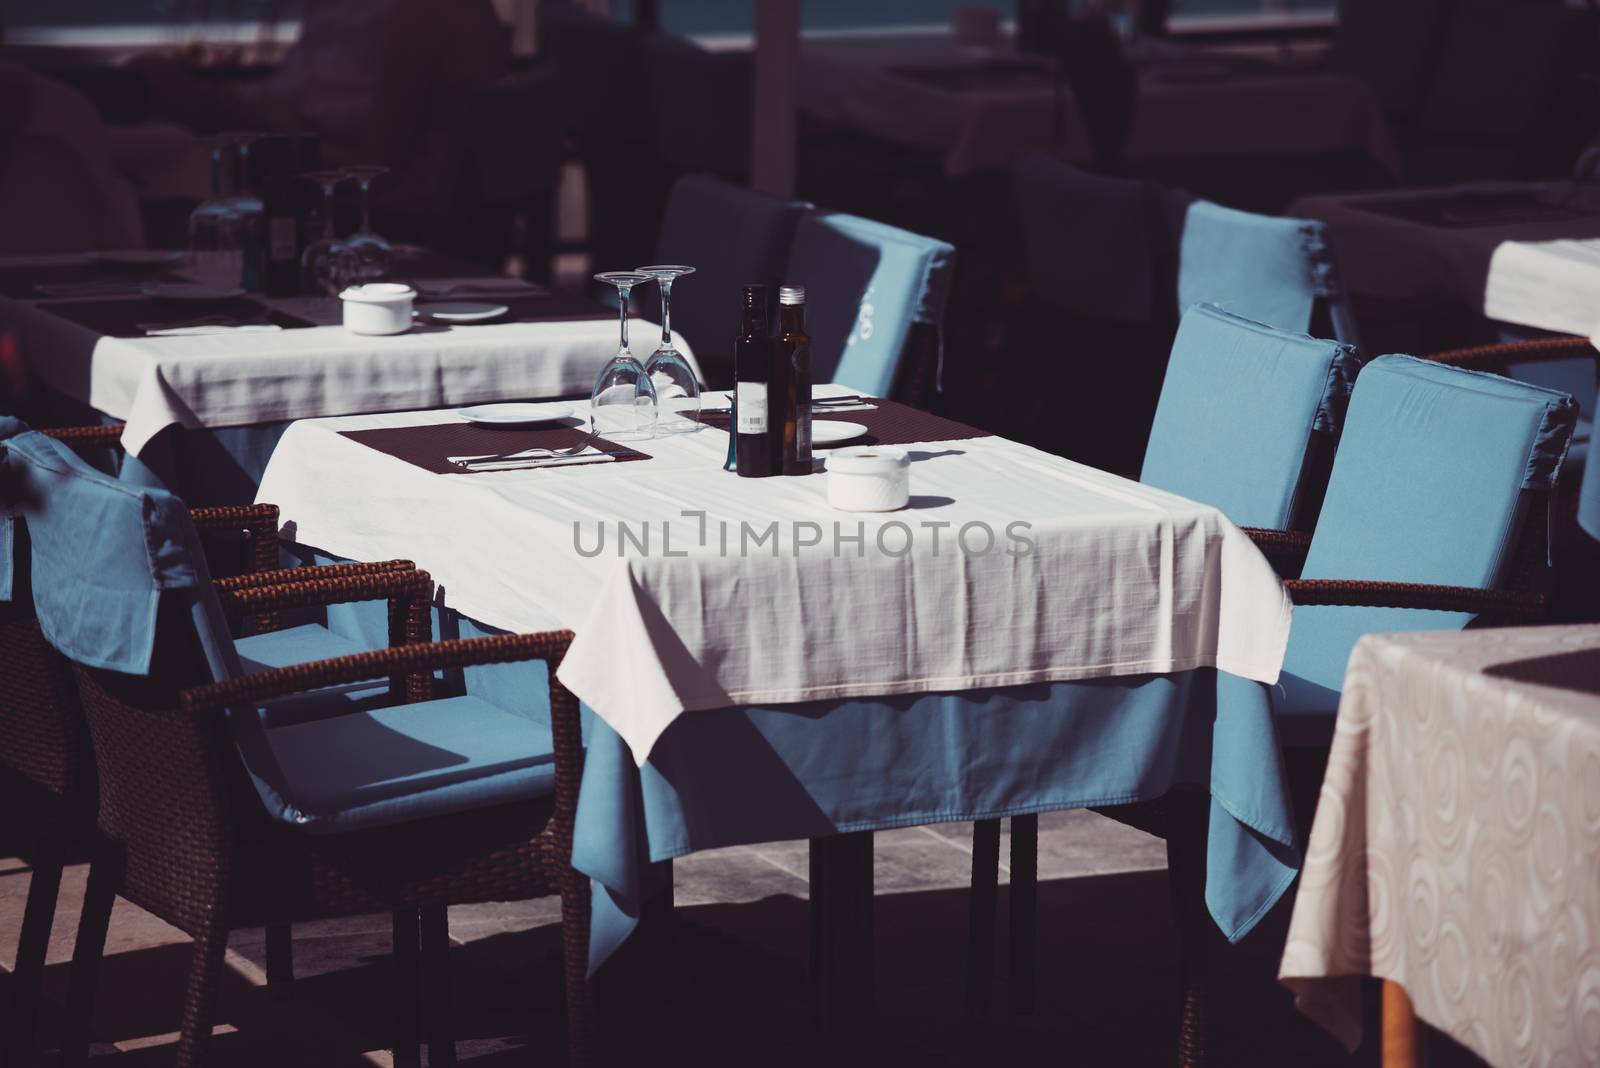 Tables at restaurant in Tenerife, Spain by Nanisimova